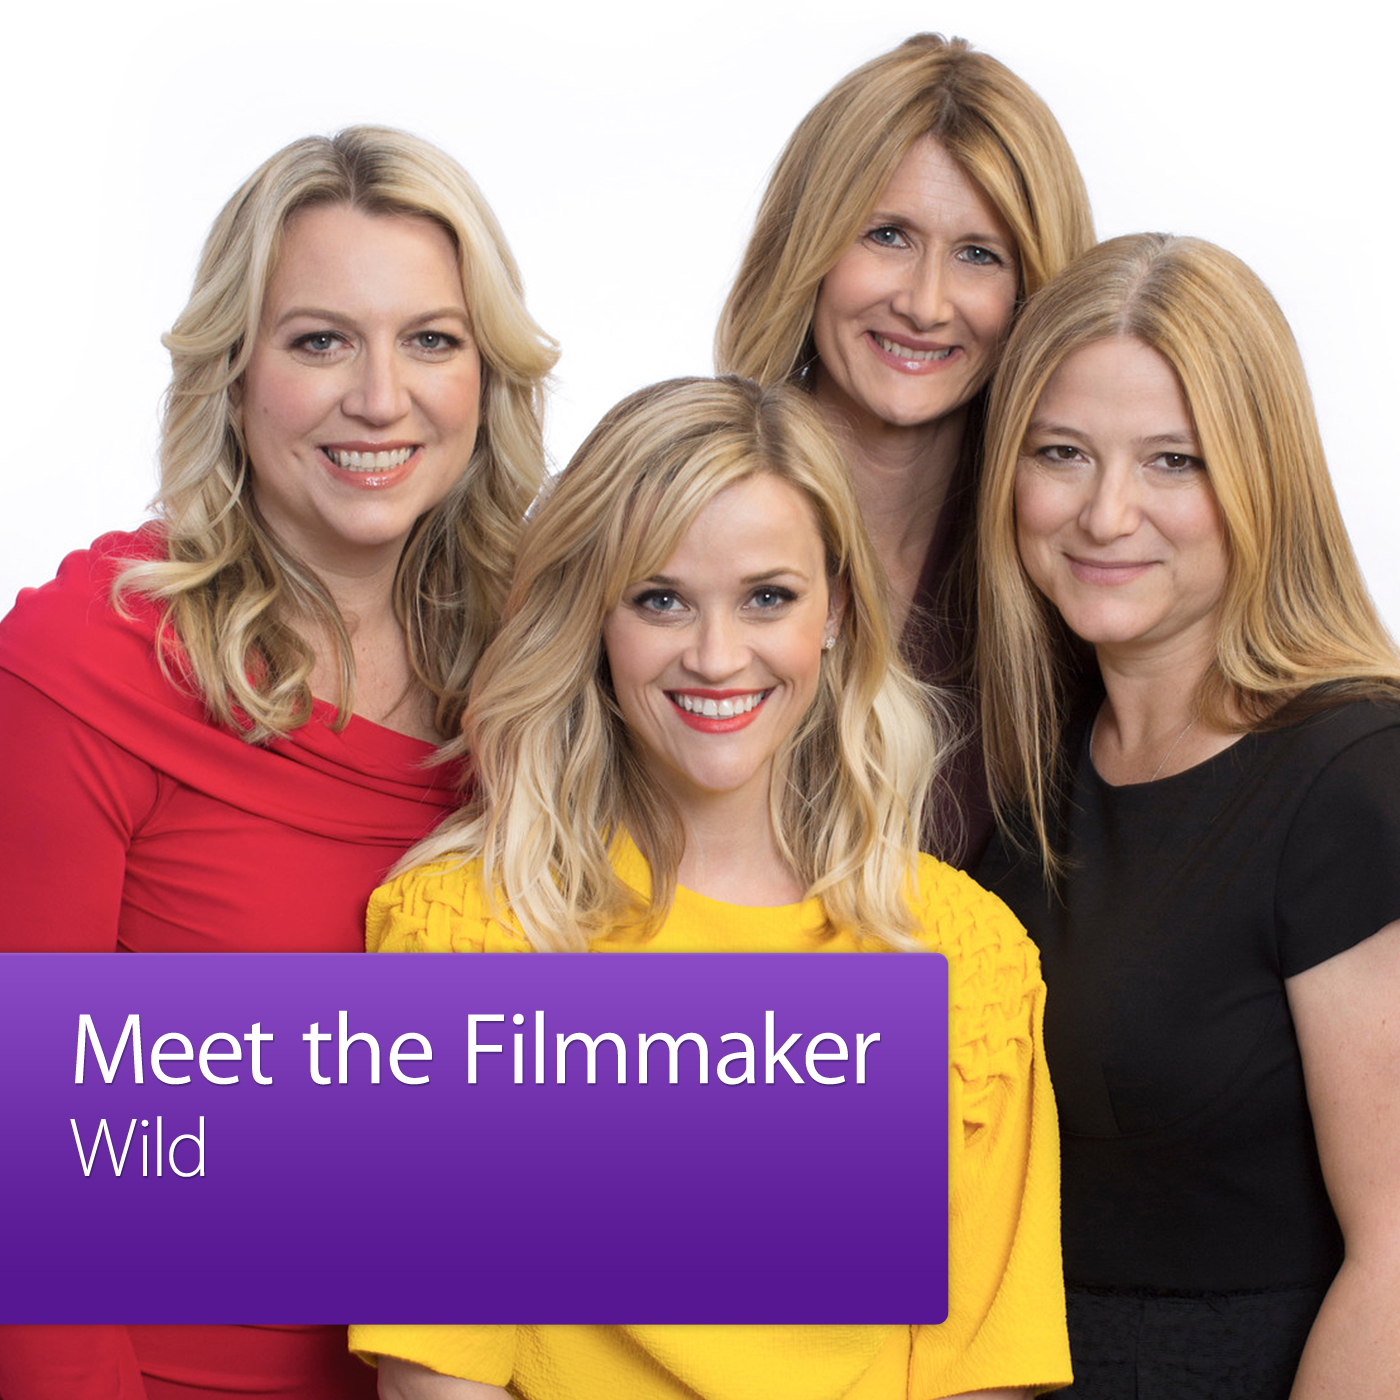 Reese Witherspoon, Laura Dern, Cheryl Strayed, and Bruna Papandrea: Meet the Filmmaker